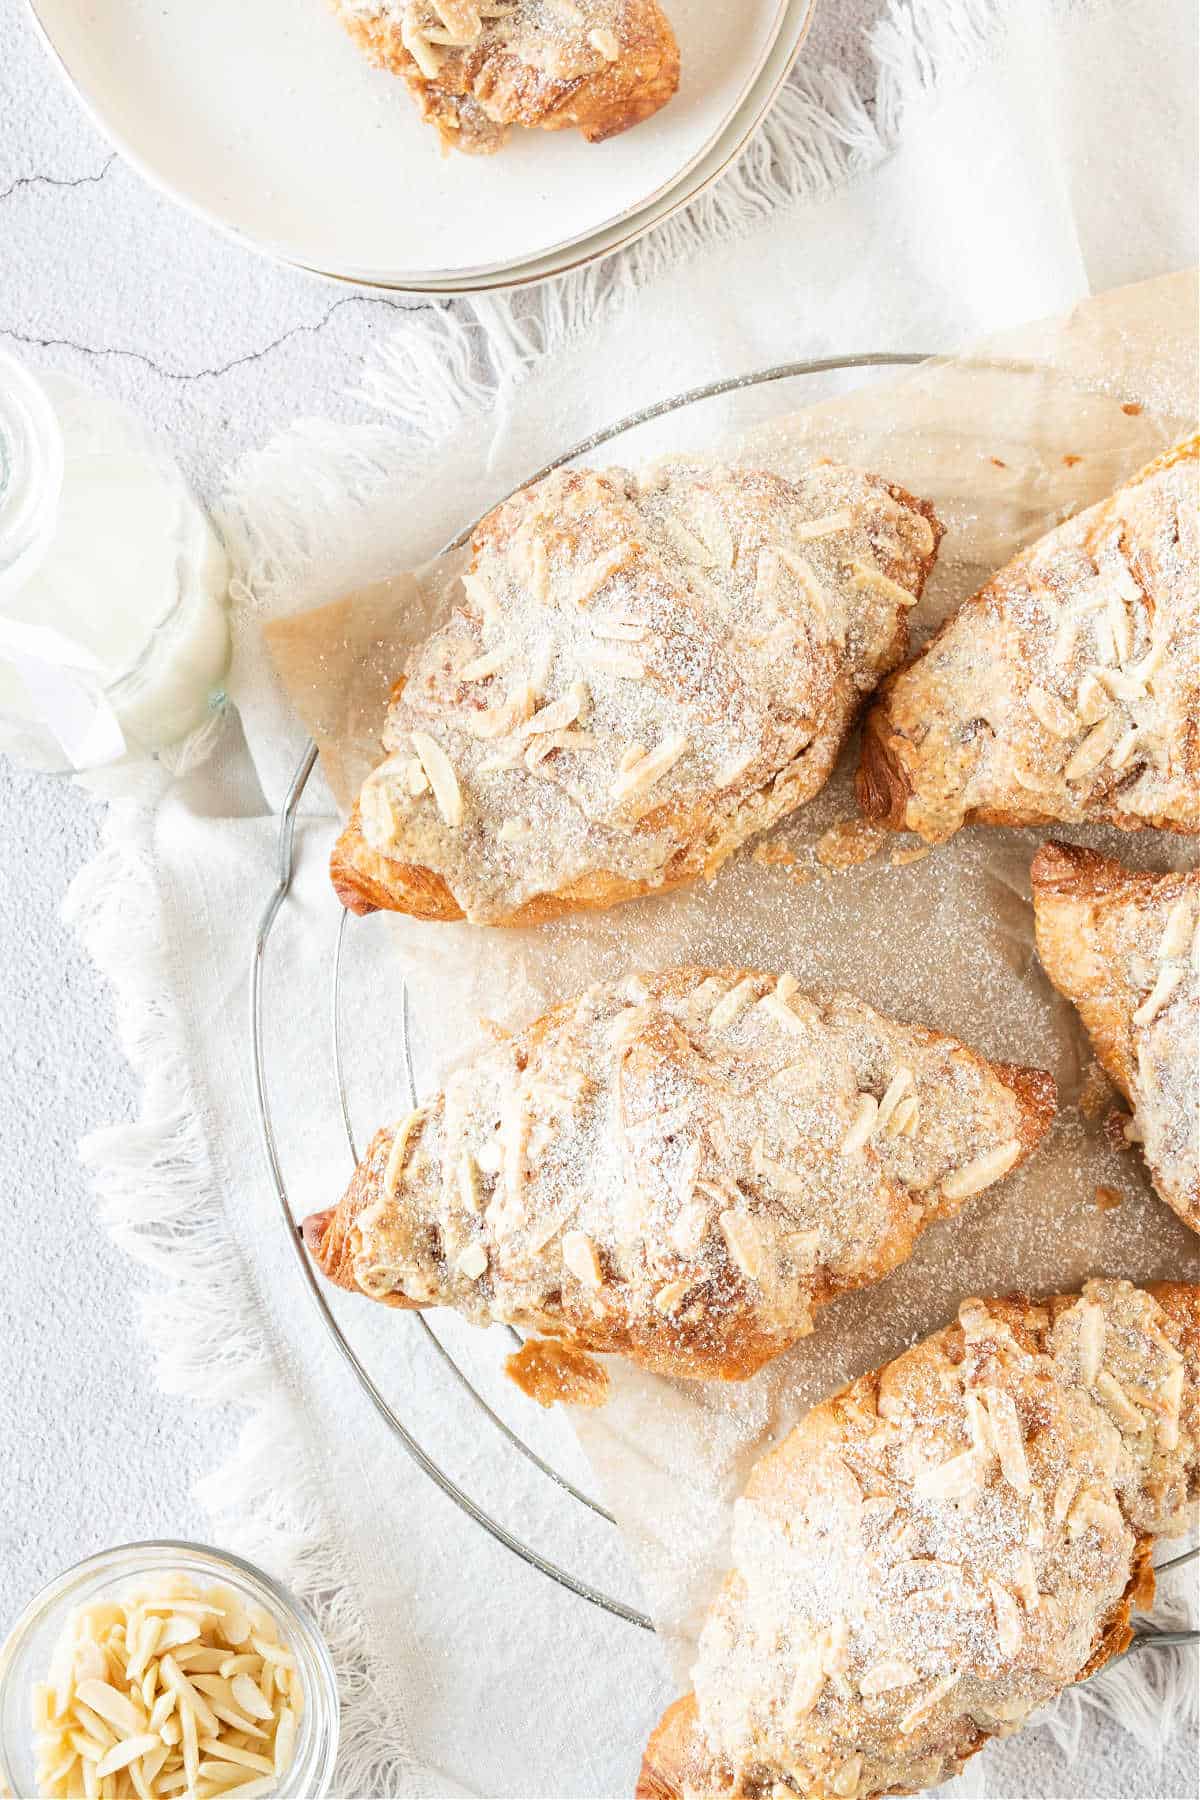 Top view of several almond croissants on a white plate with a white cloth. Light gray surface. 